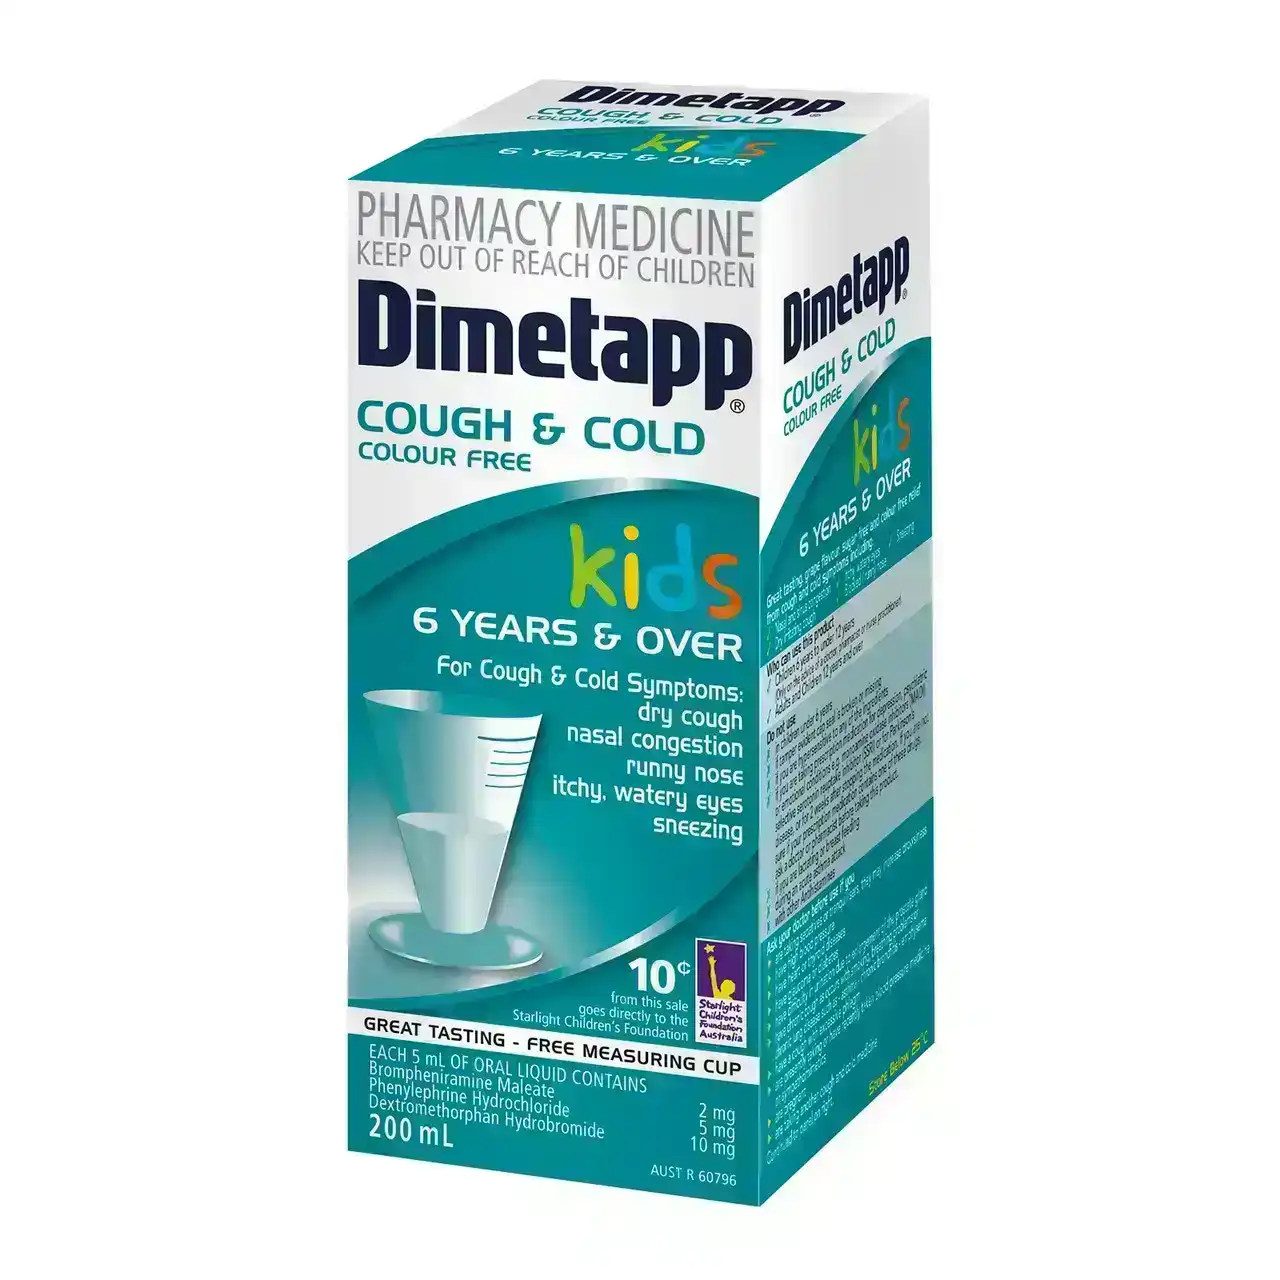 Dimetapp Cough &amp; Cold Kids 6 Years + Colour Free 200ml